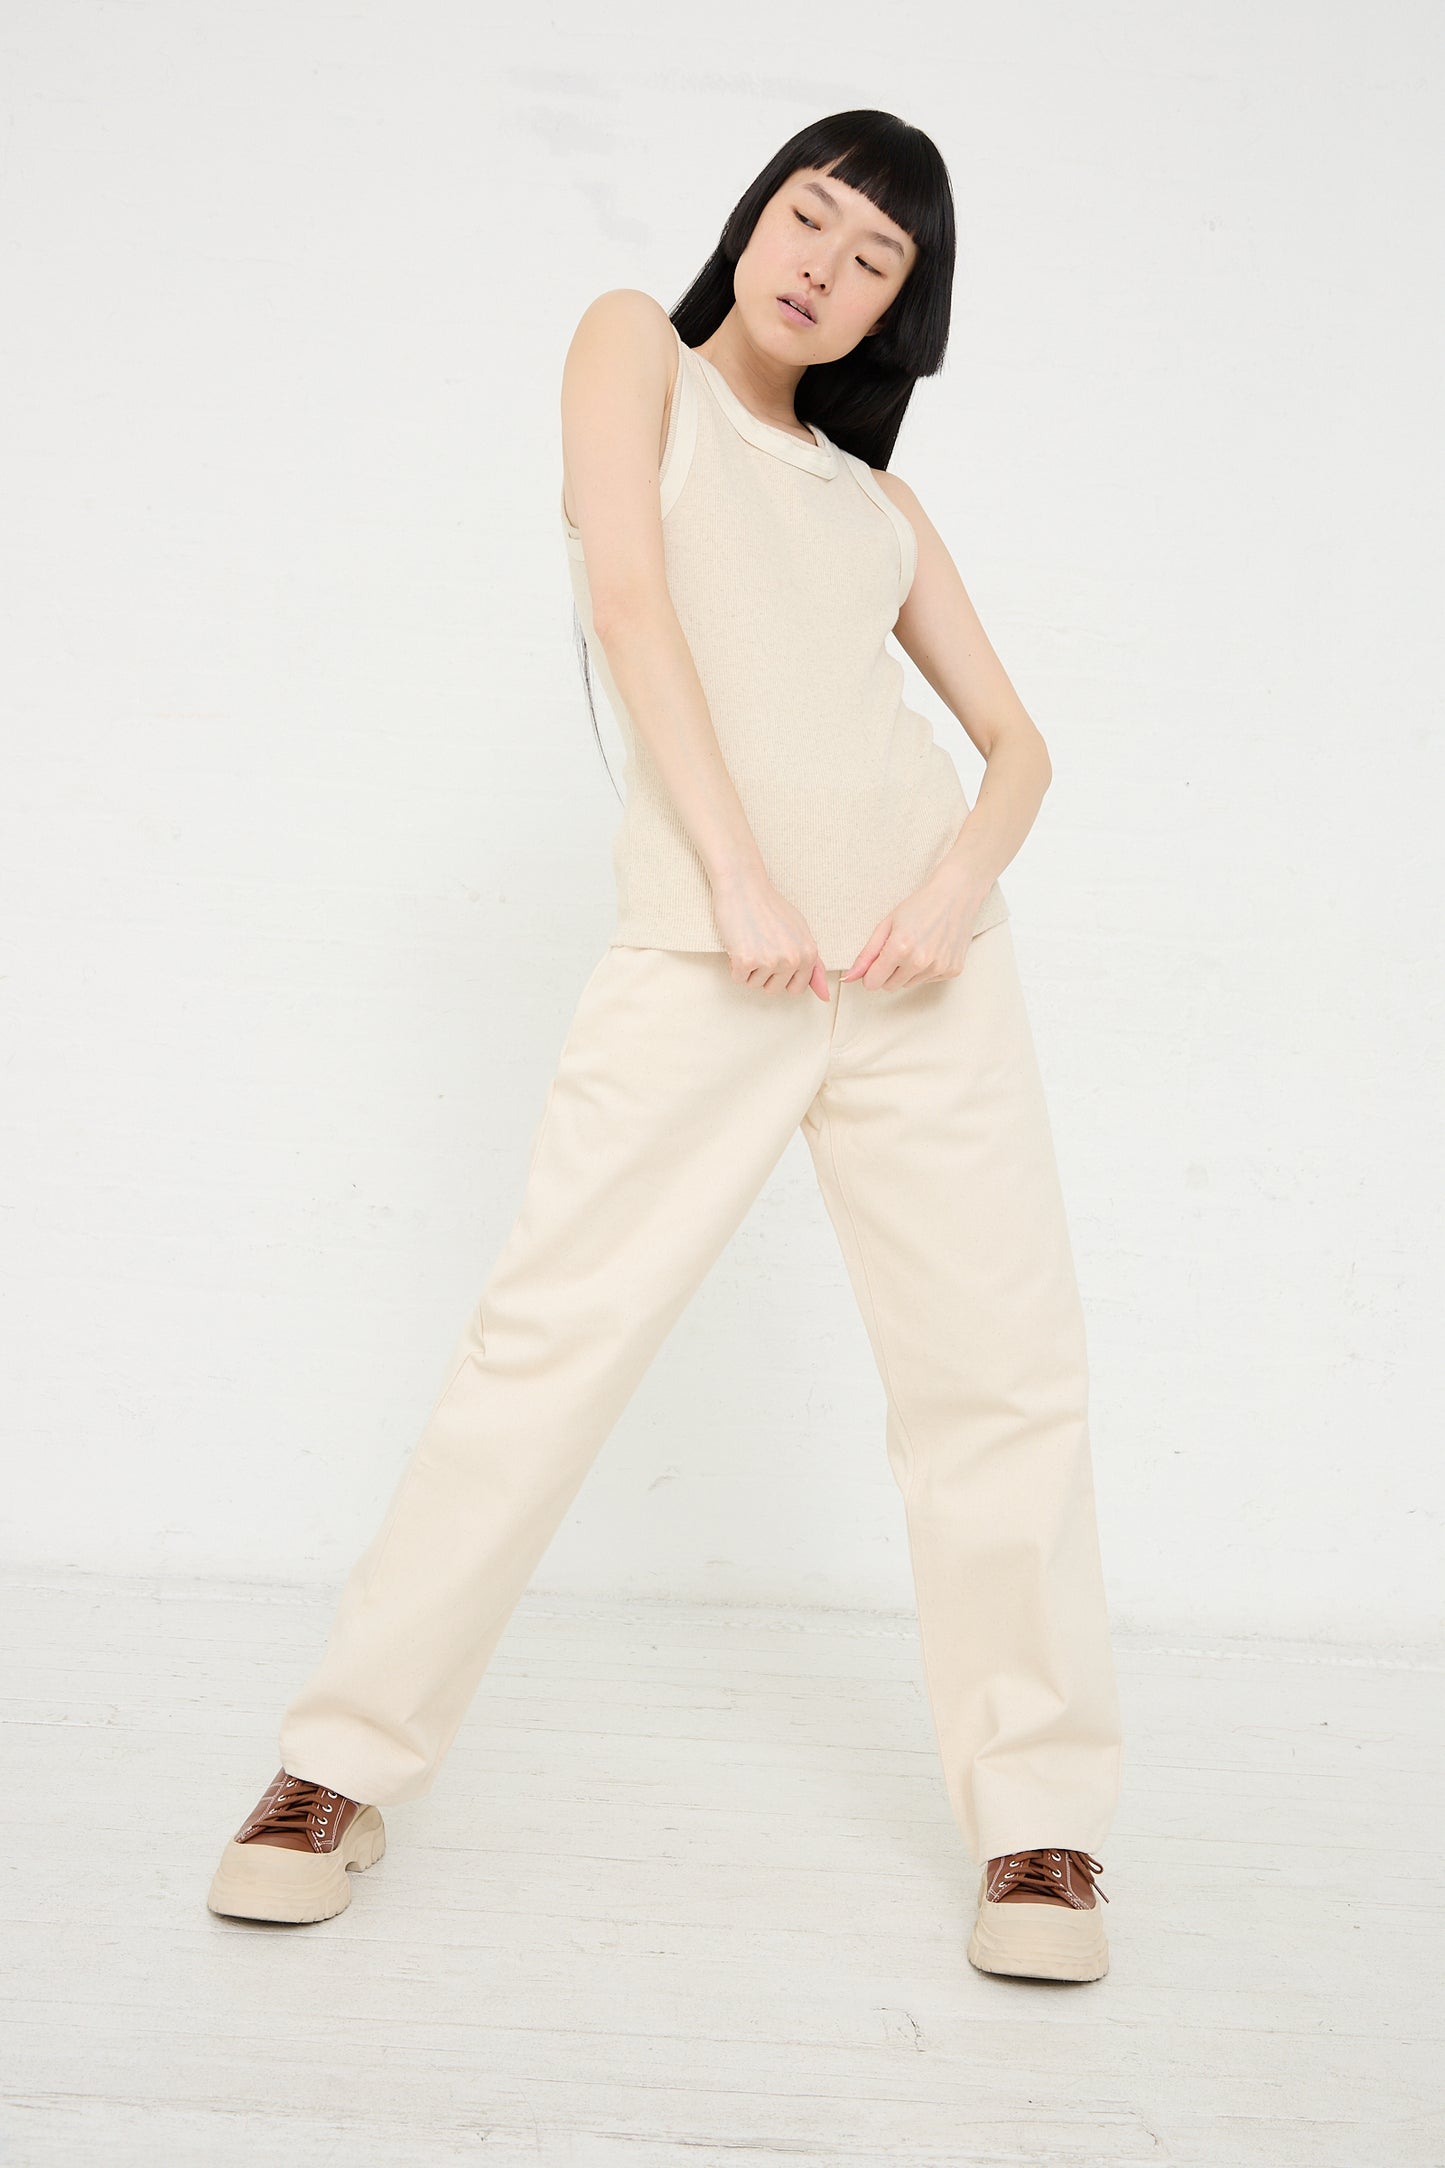 A woman in a Beige Baserange Organic Cotton Hemp Rib Supple Tank in Undyed and trousers poses with her hands on her hips against a white background.